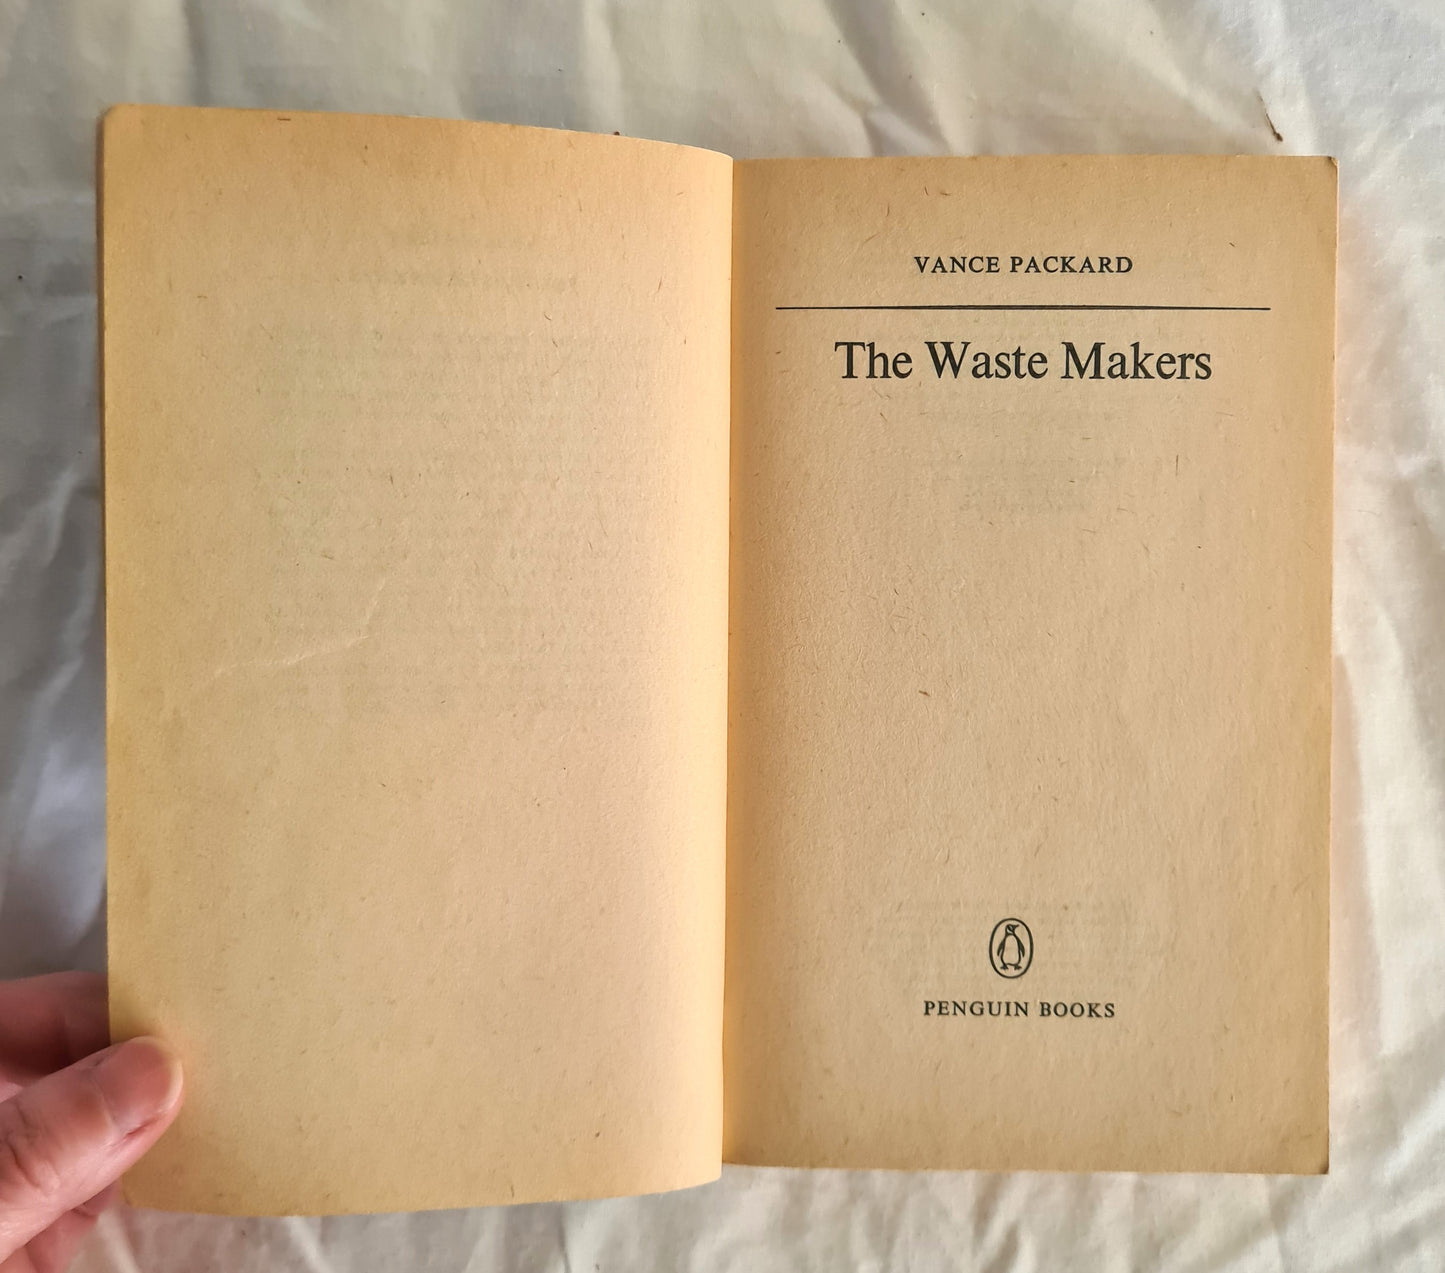 The Waste Makers by Vance Packard